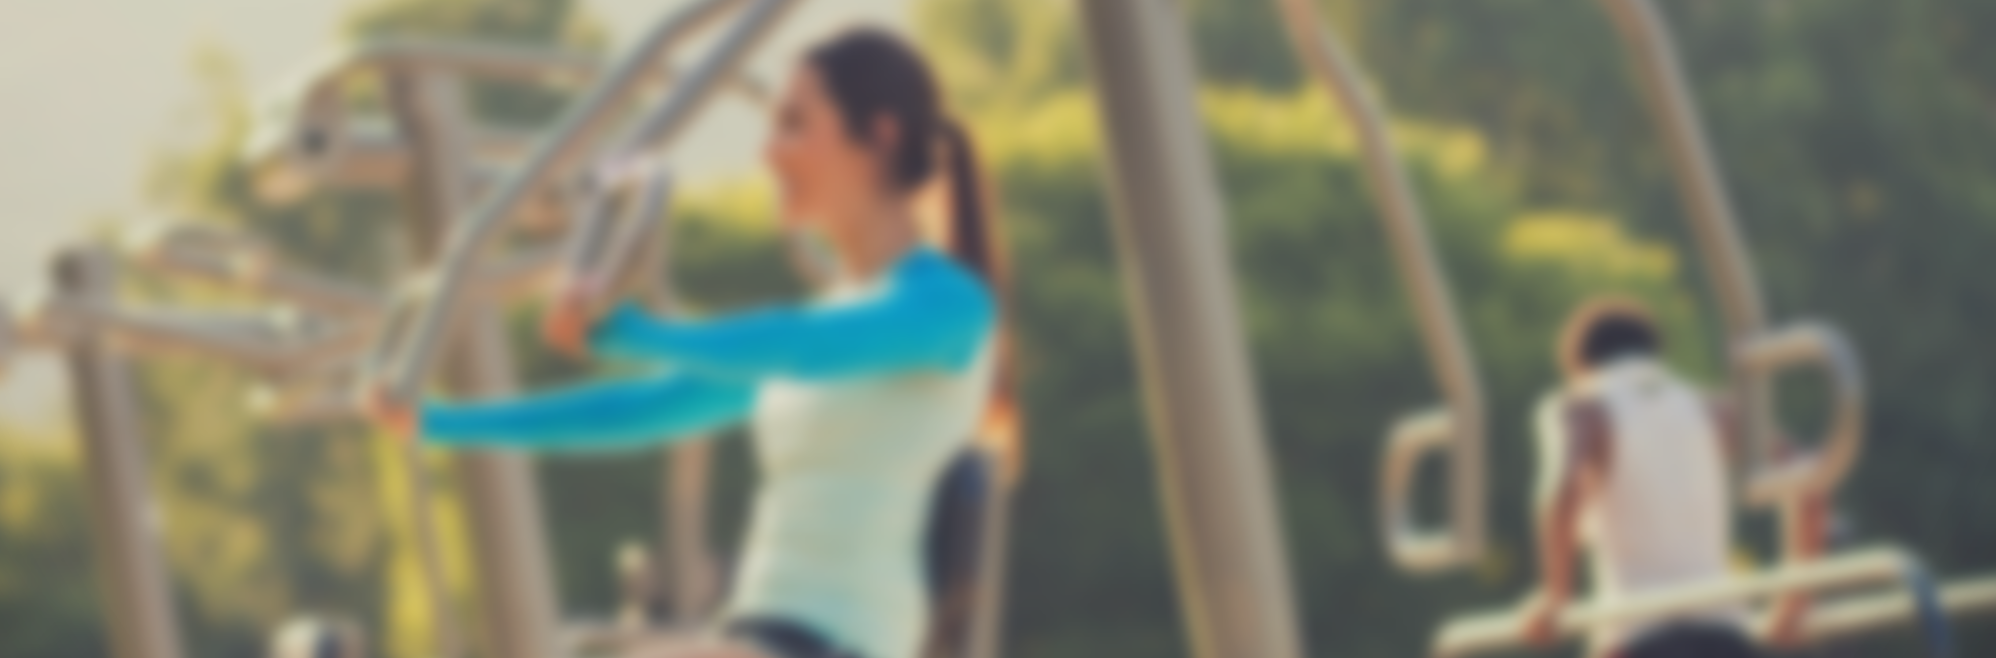 10 Ways Outdoor Fitness Parks Make Life Better